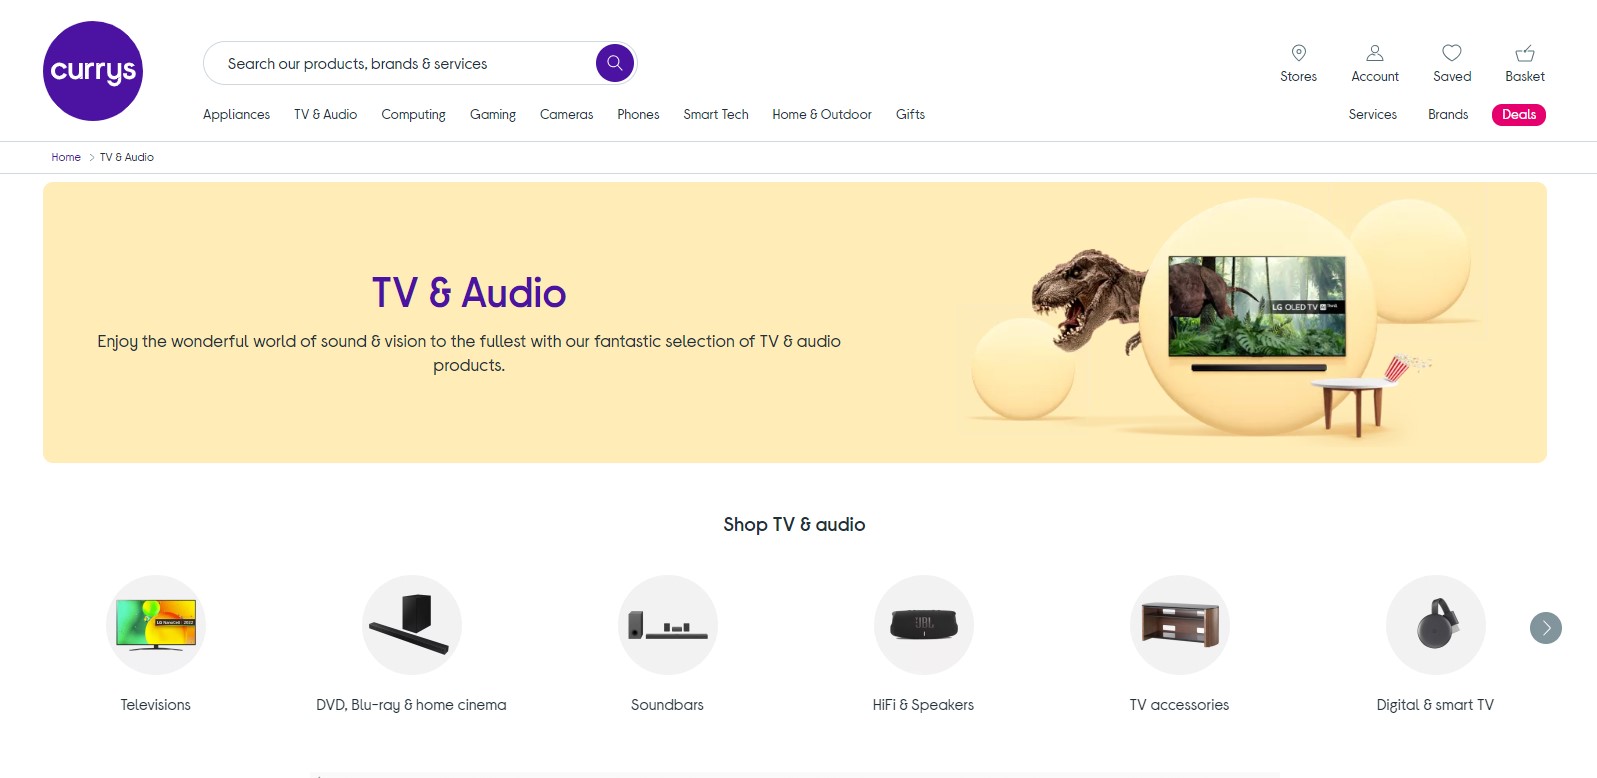 Currys TV & Audio products